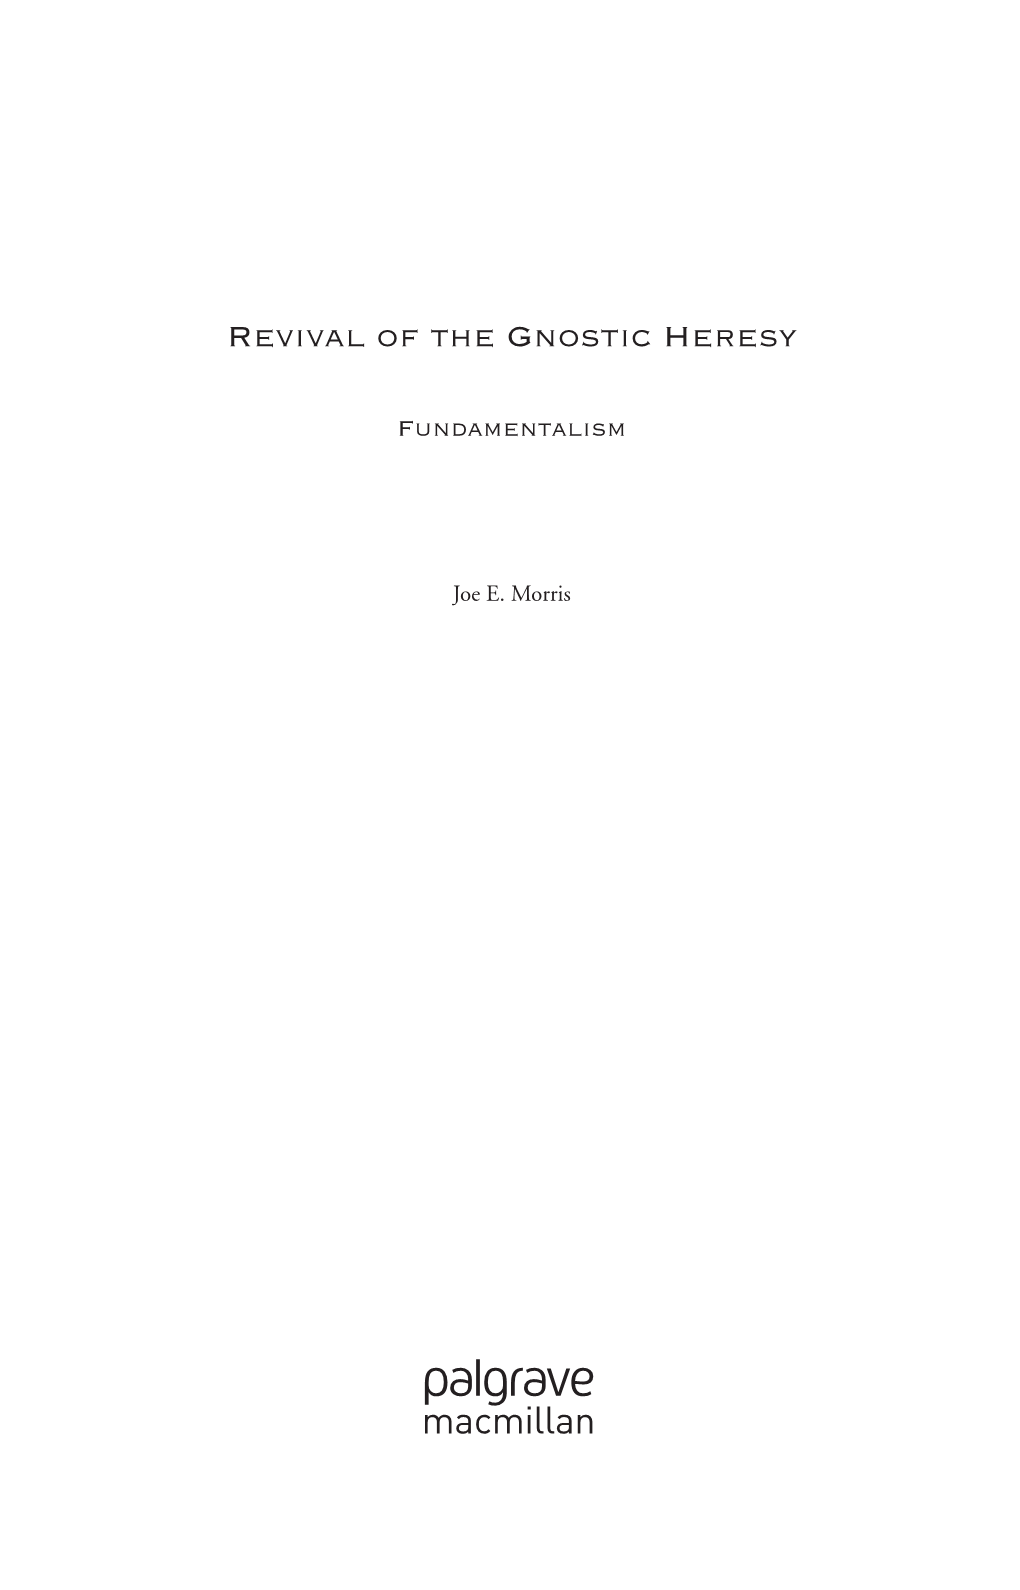 Revival of the Gnostic Heresy